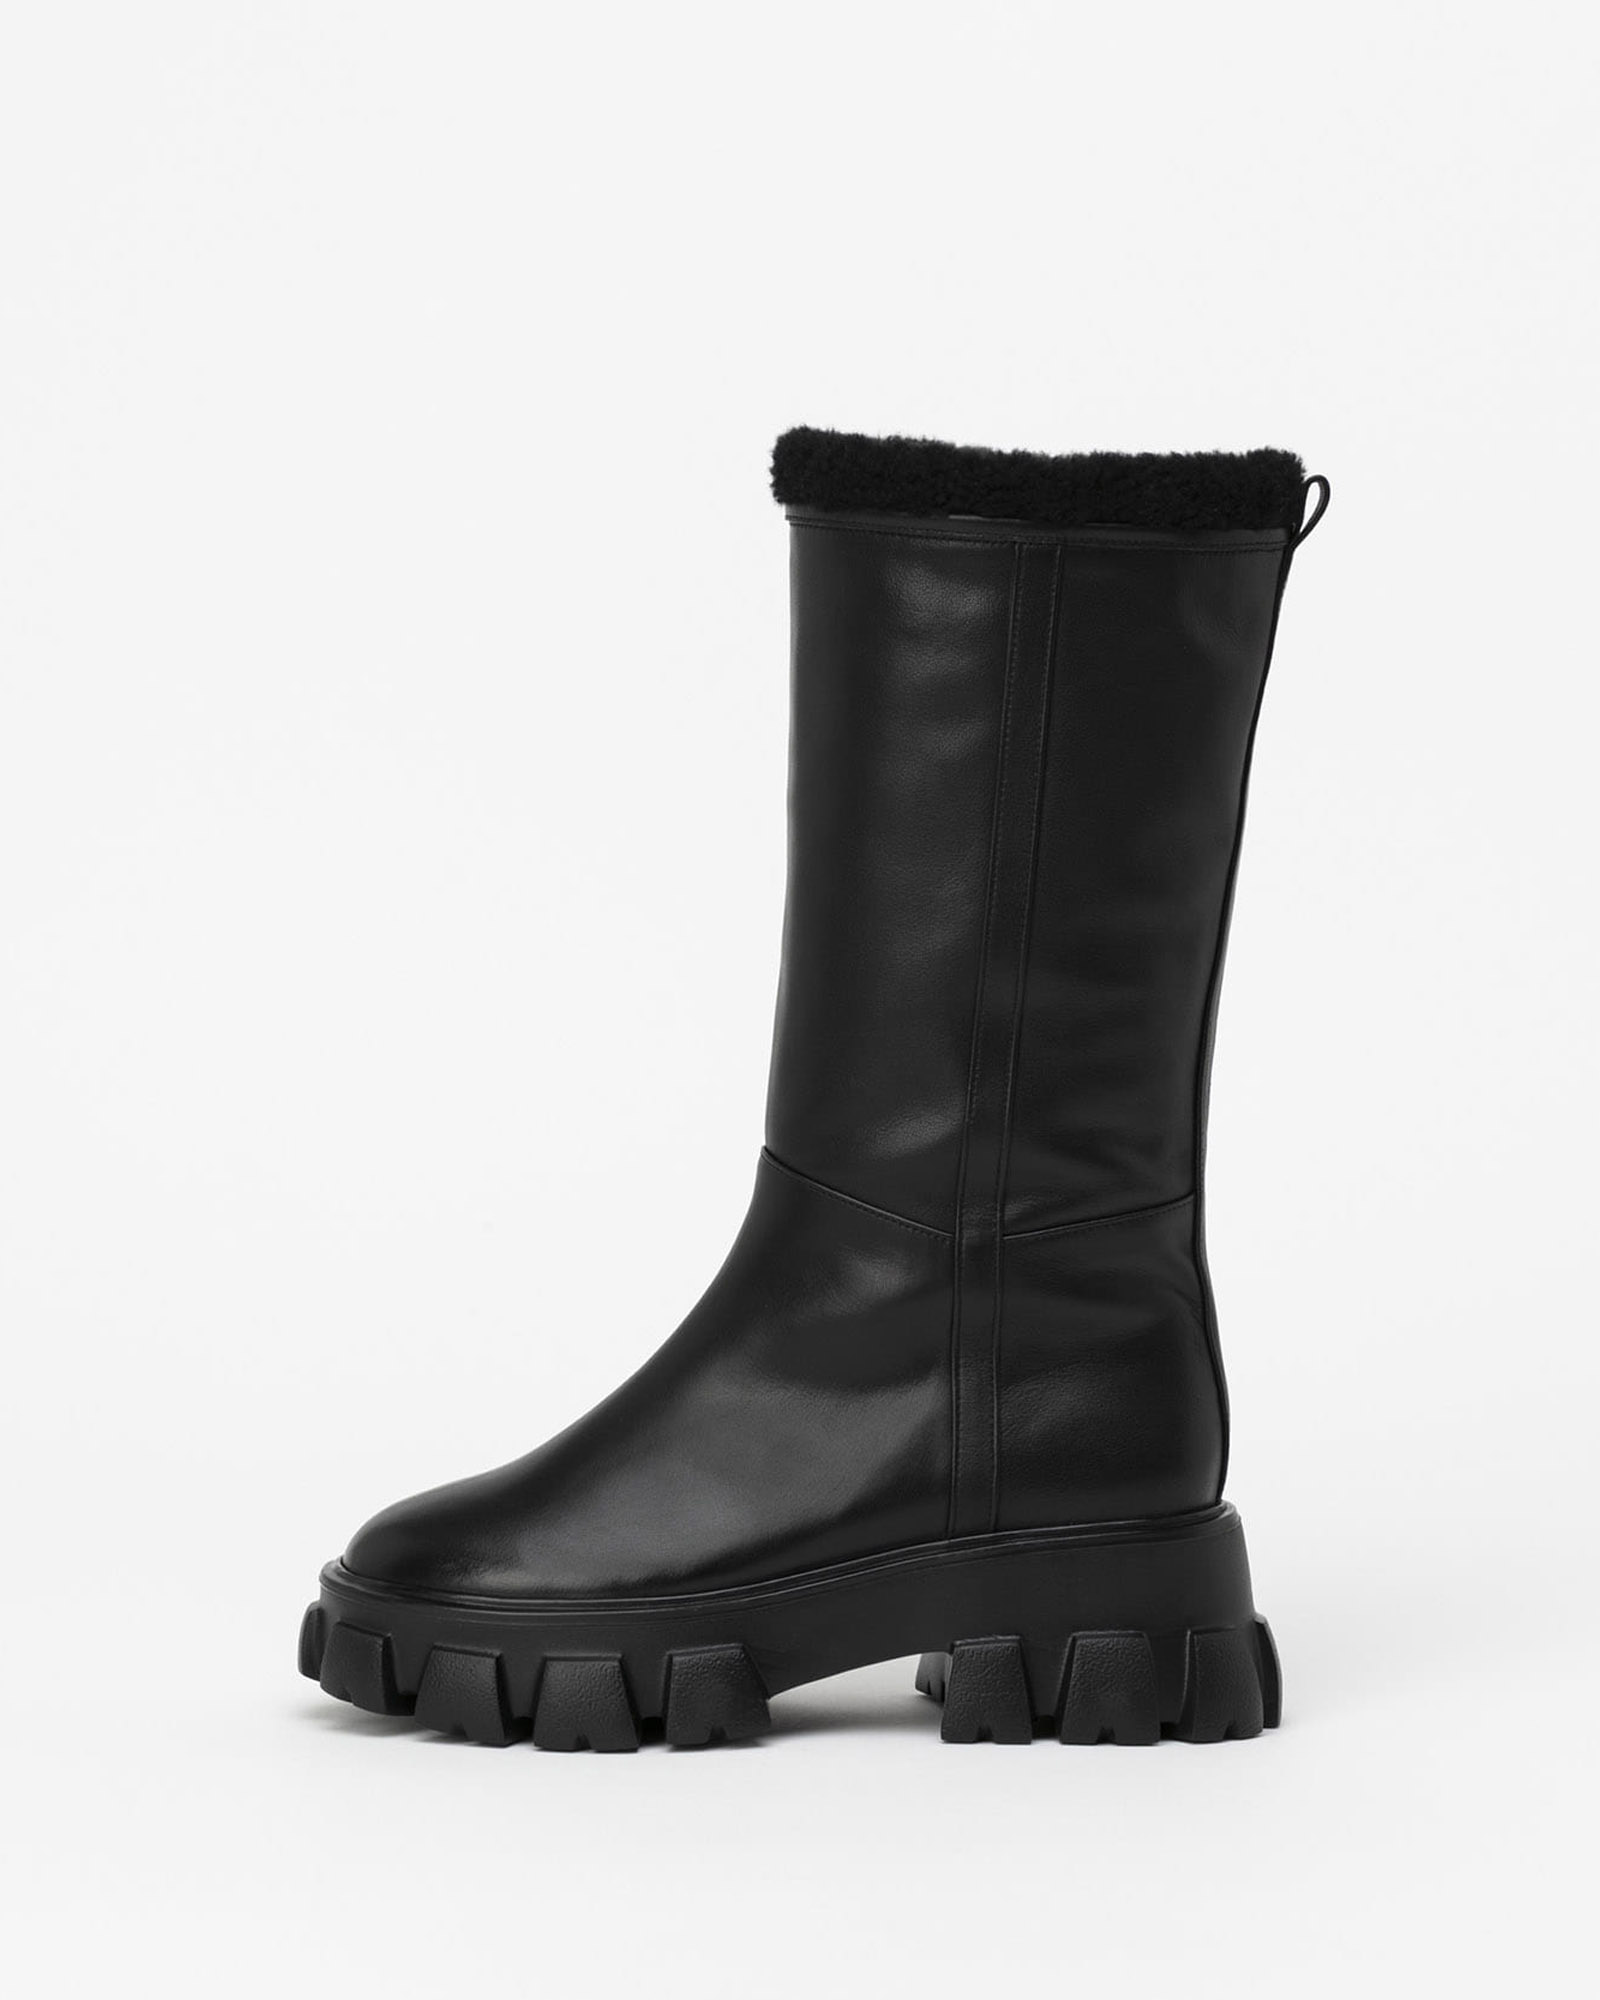 Trione Shealing Lug Sole Boots in Black